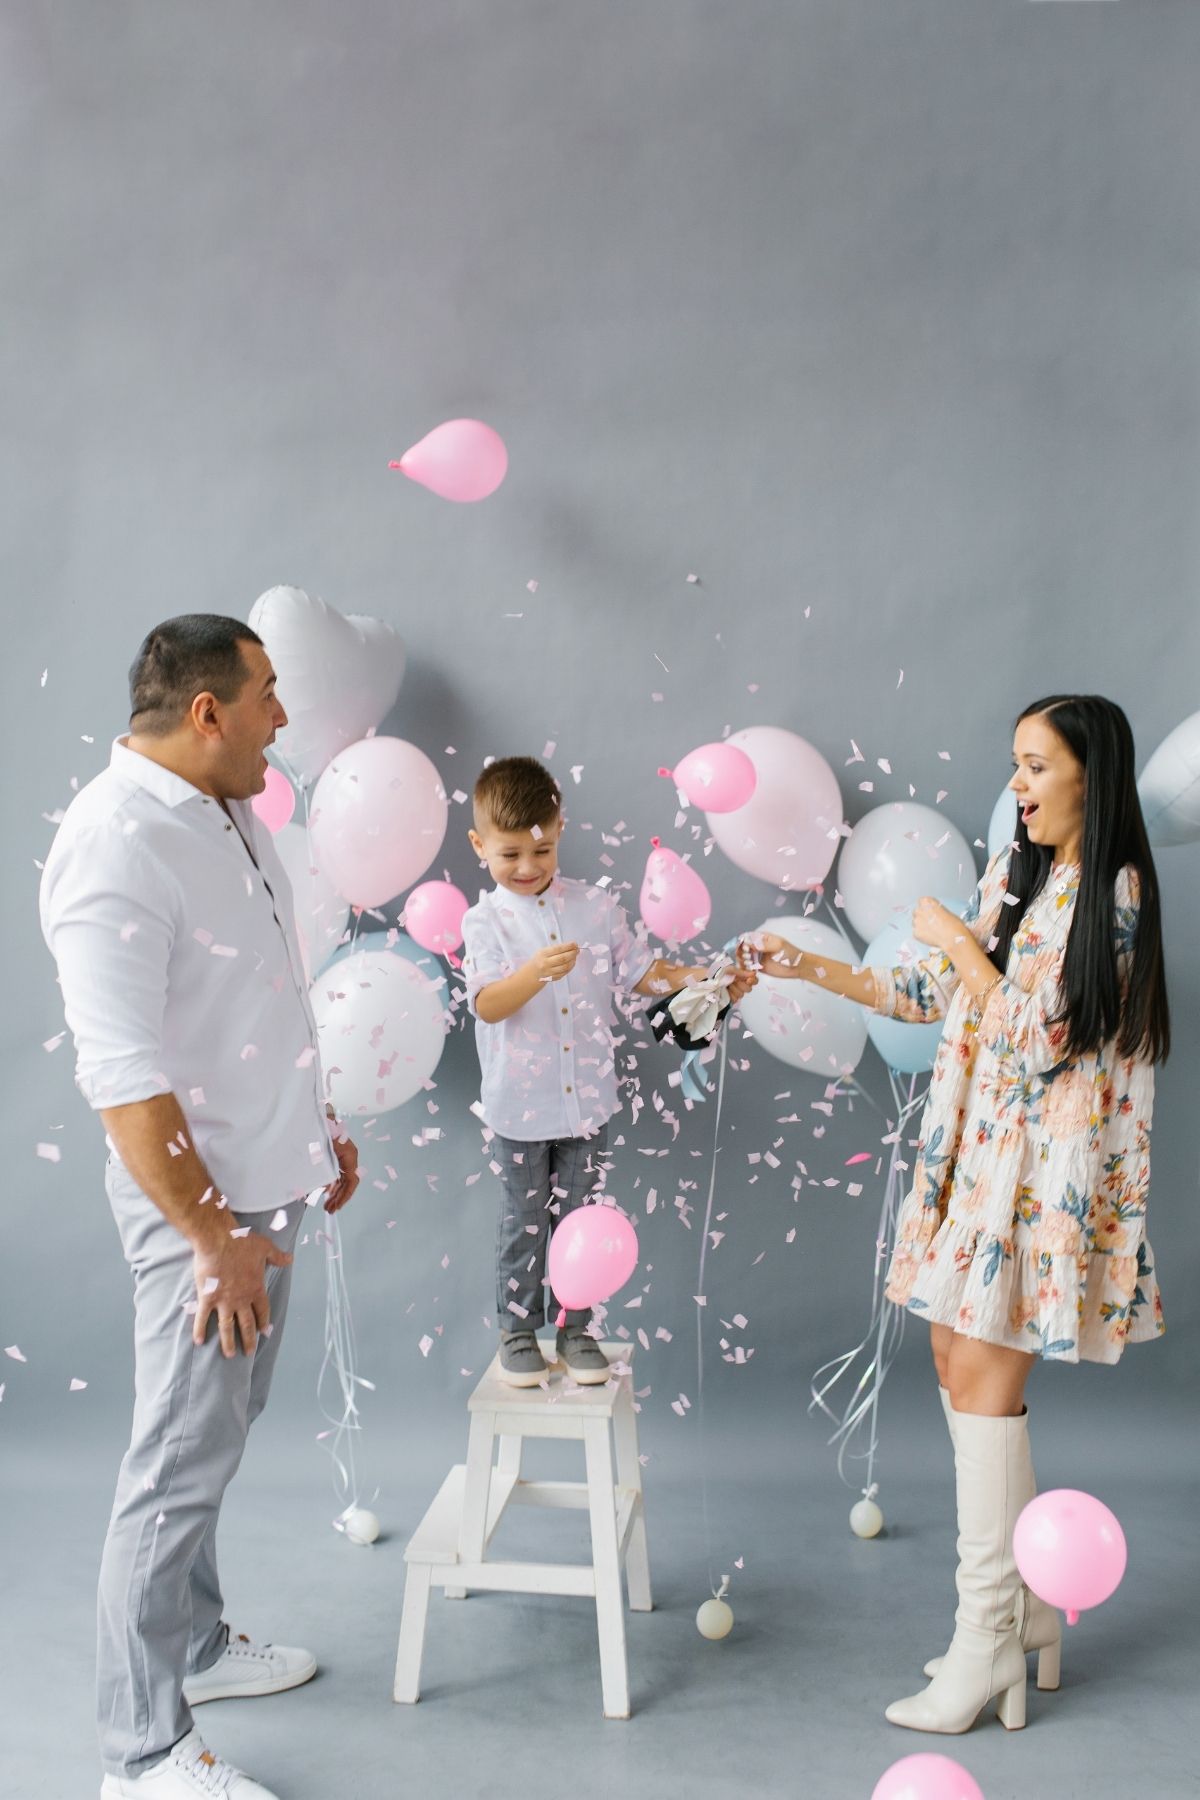 Man and woman smile with excitement next to boy on stool while pink confetti and balloons fall to ground.